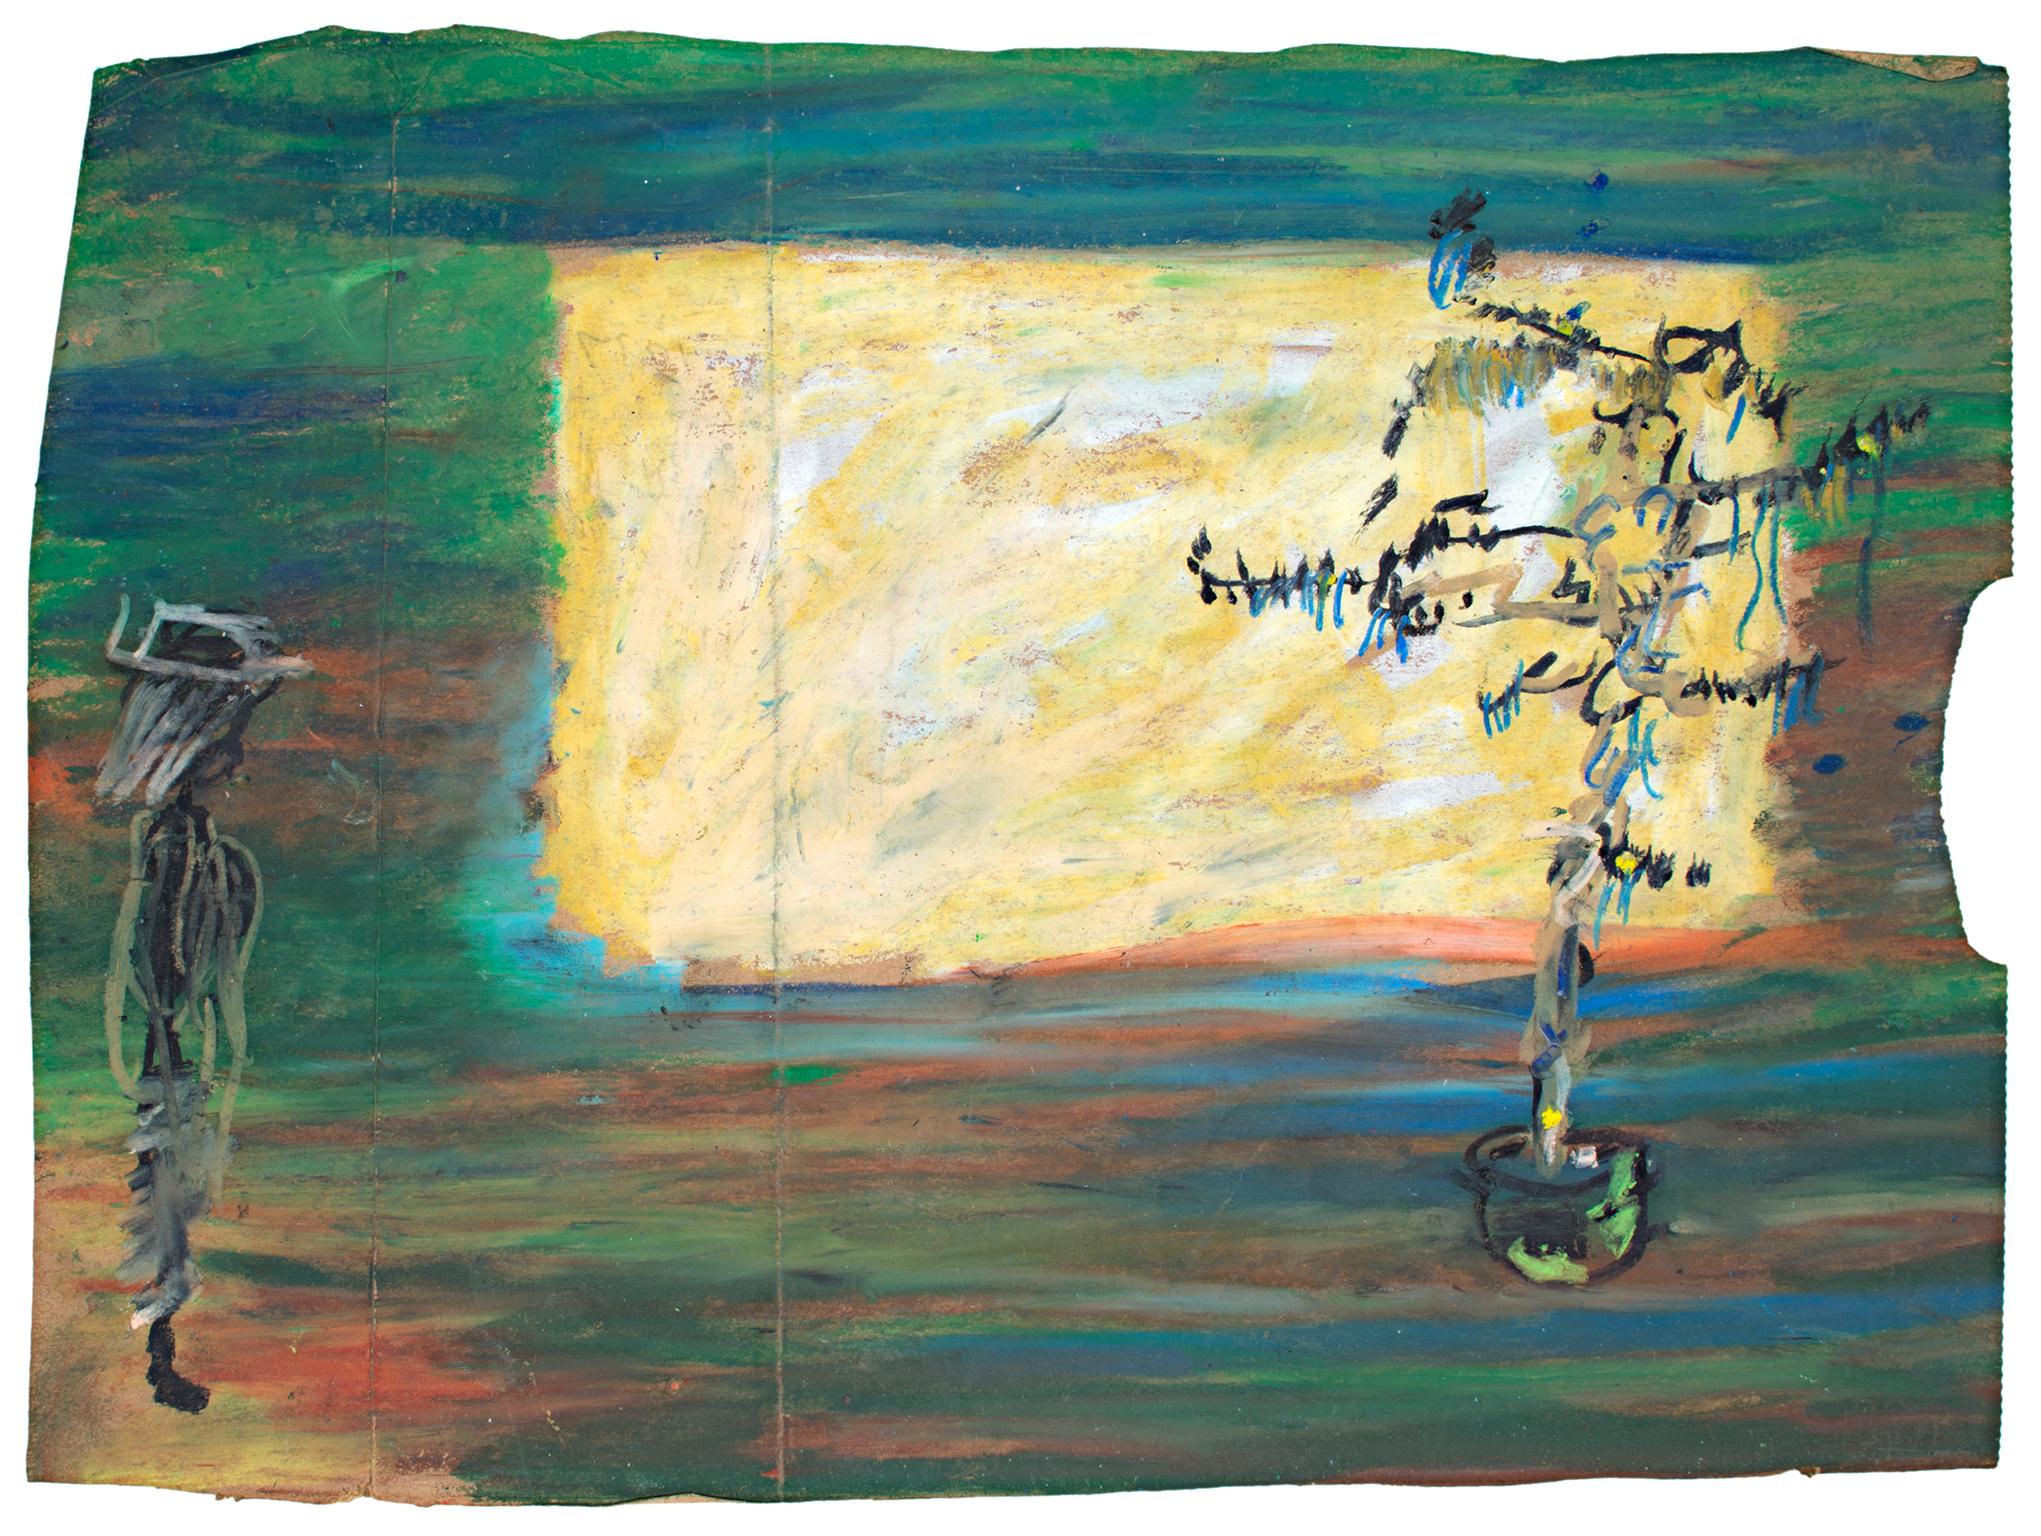 "Person Vs. Plant Vs. Abstract Canvas on Blased Wall" is an original oil pastel drawing on a grocery bag by Reginald K. Gee. The artist signed the piece on the back. This piece features an abstract figure in a hat on the left, a nearly leafless tree